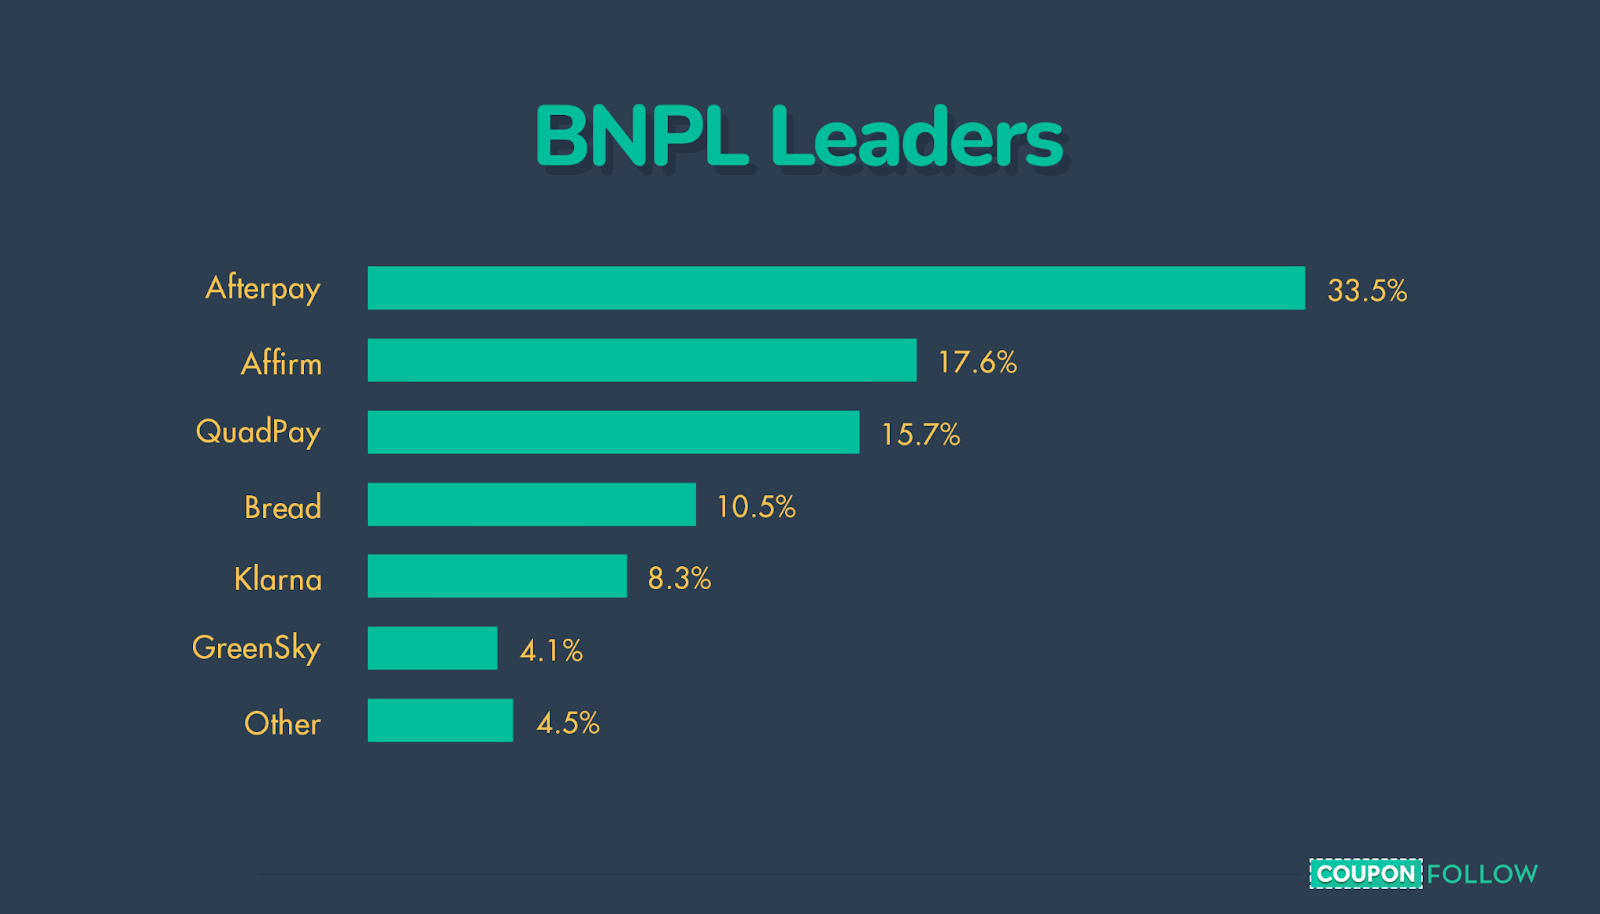 Most Common BNPL Leaders